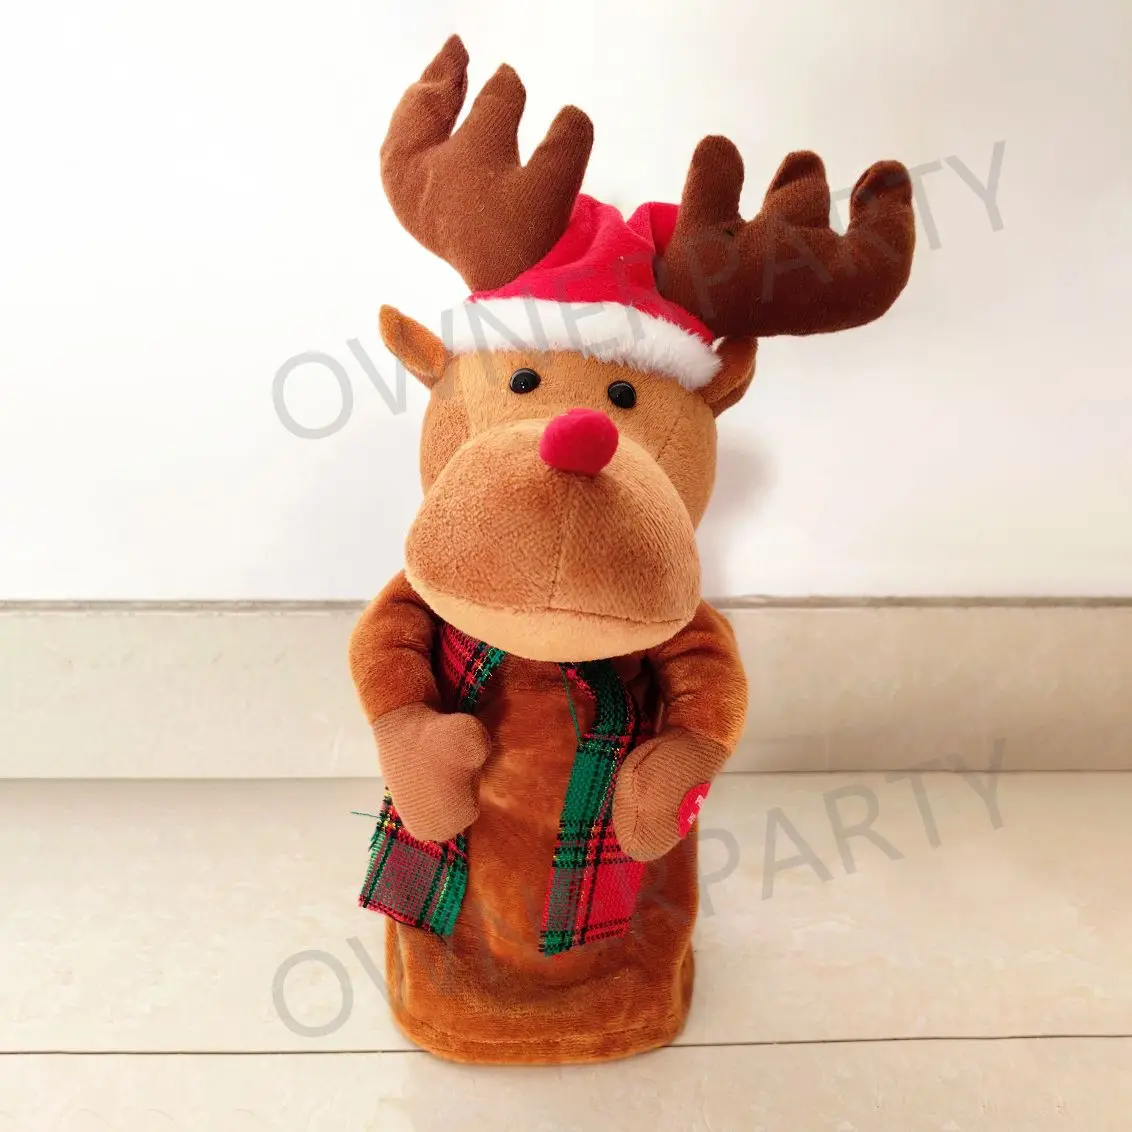 Reindeer Funny Gifts Christmas Decoration Supplies Animated Christmas Decorations For Home Party Xmas Decor